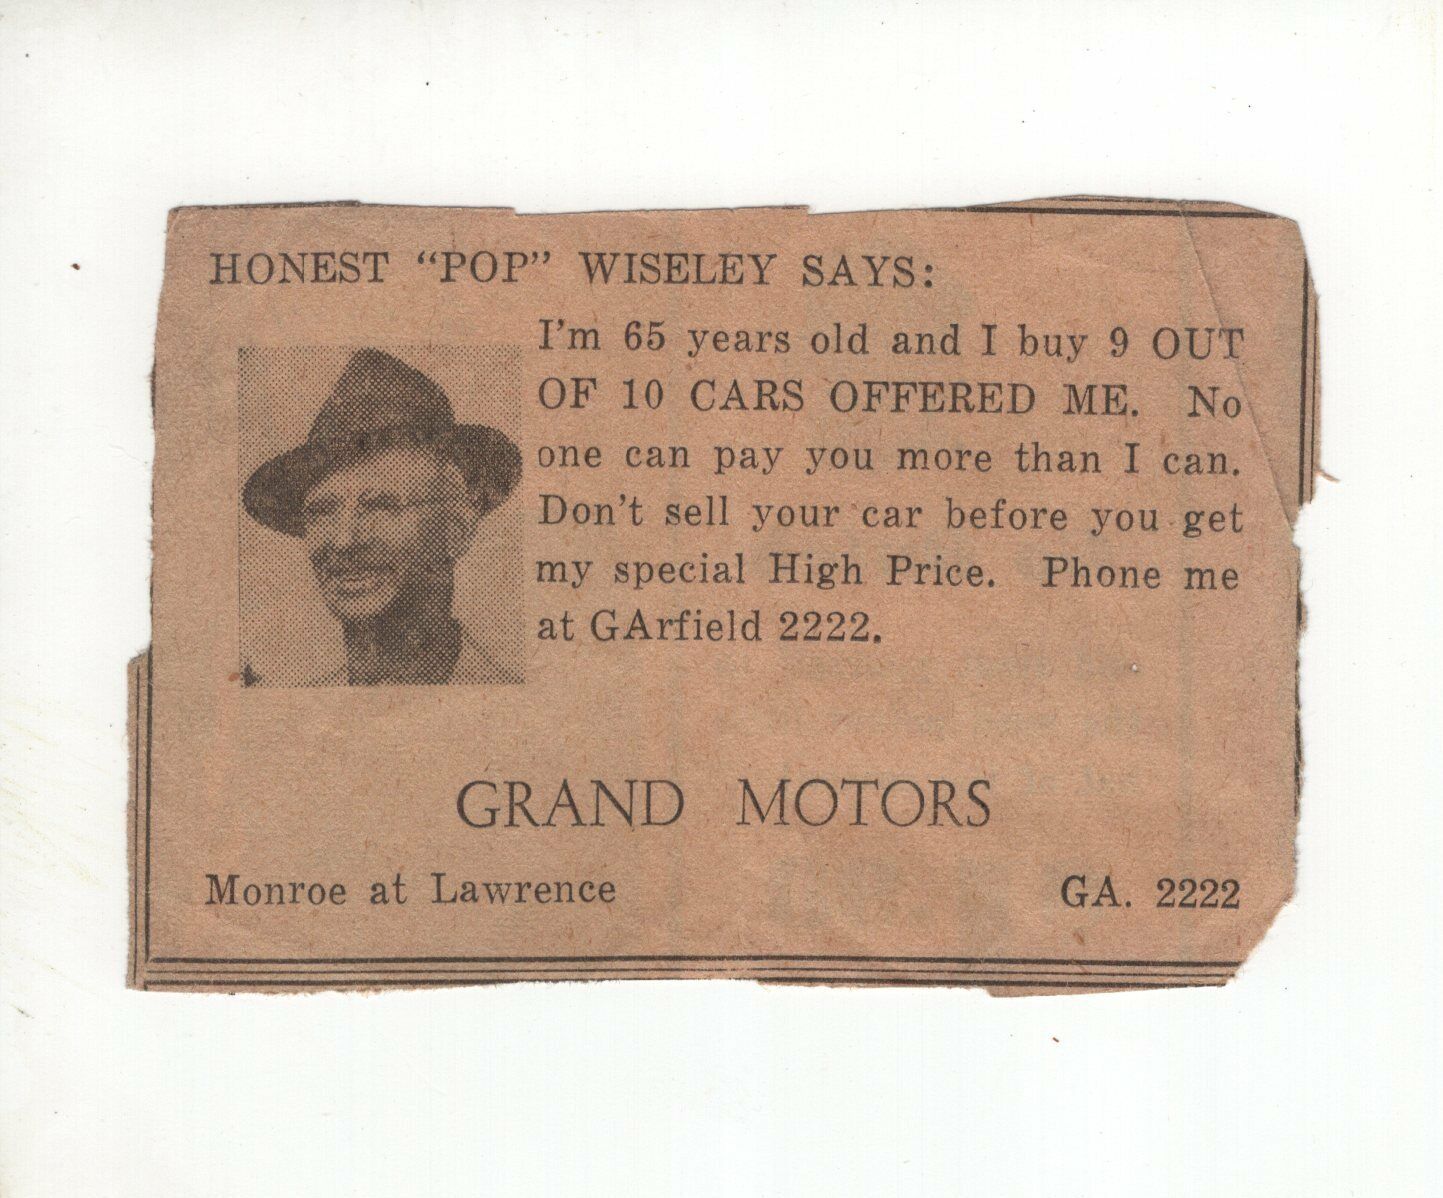 1930s - 1940s? Newspaper Ad for Honest Pop Wisely at Grand Motors